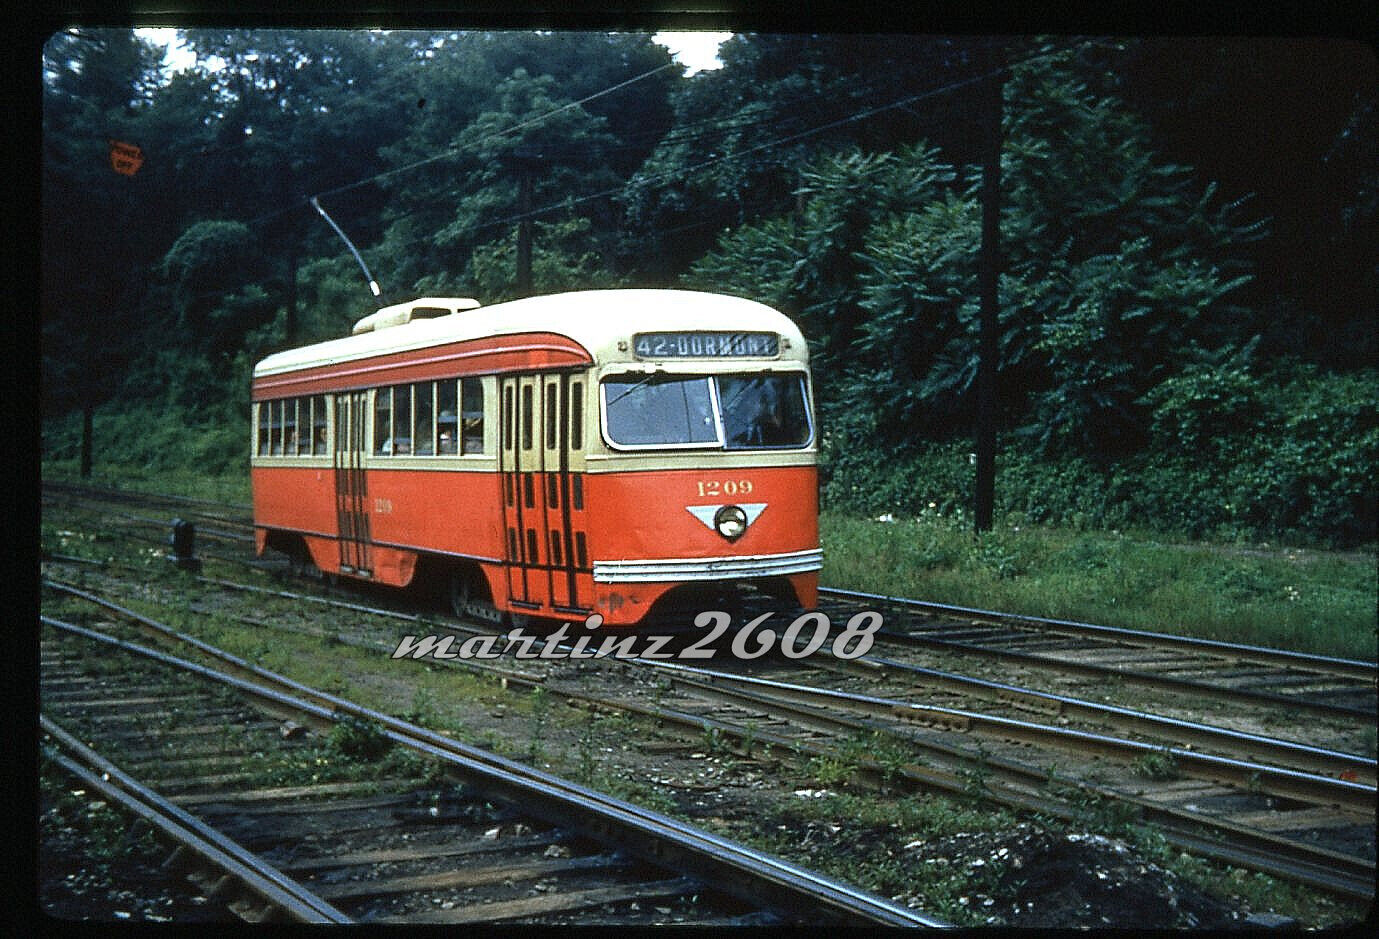 (GT) DUPE TRACTION/TROLLEY SLIDE PITTSBURGH RAILWAYS CO (PRC) 1209